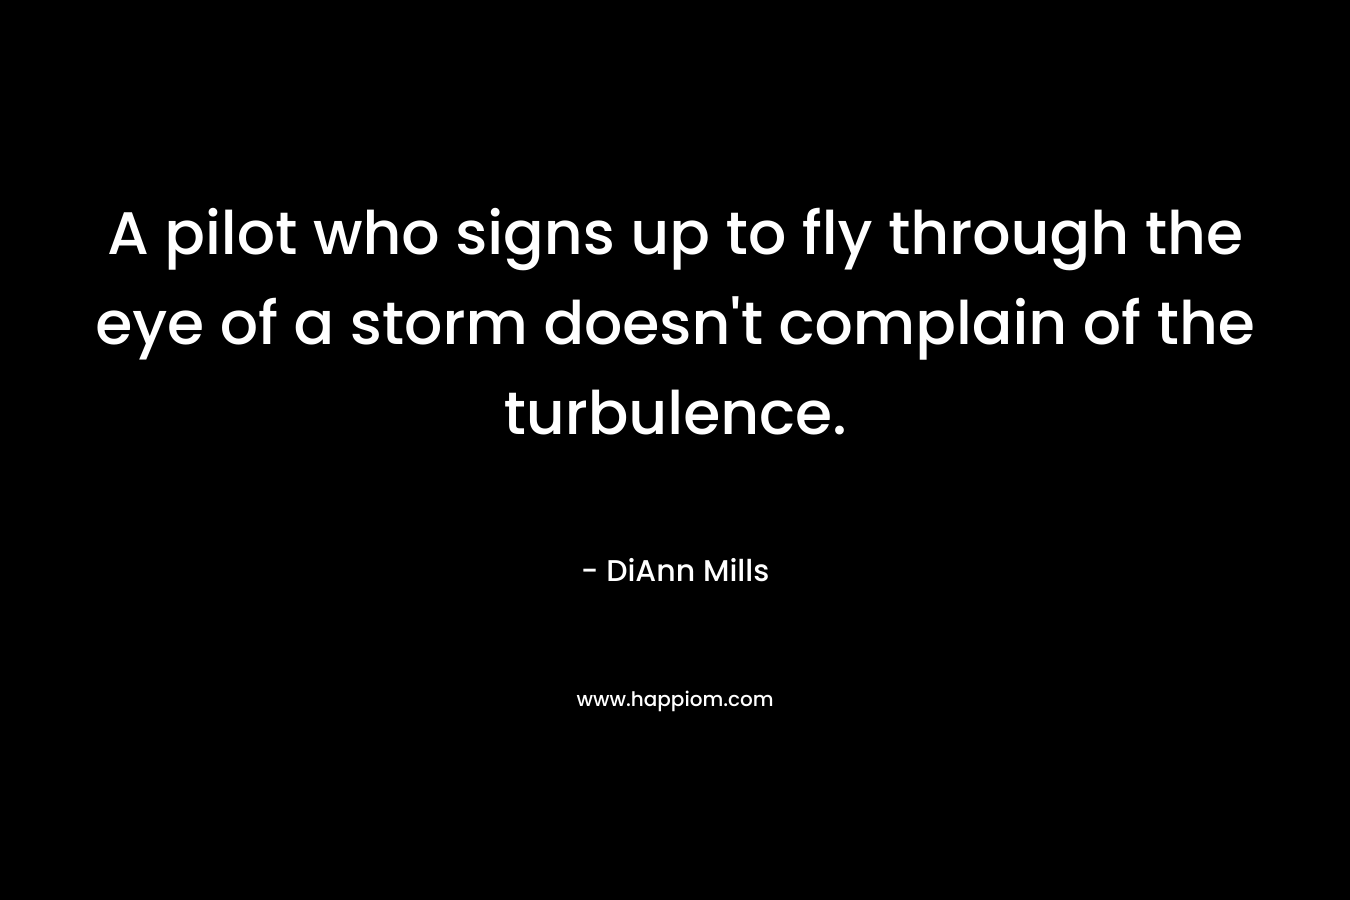 A pilot who signs up to fly through the eye of a storm doesn’t complain of the turbulence. – DiAnn Mills